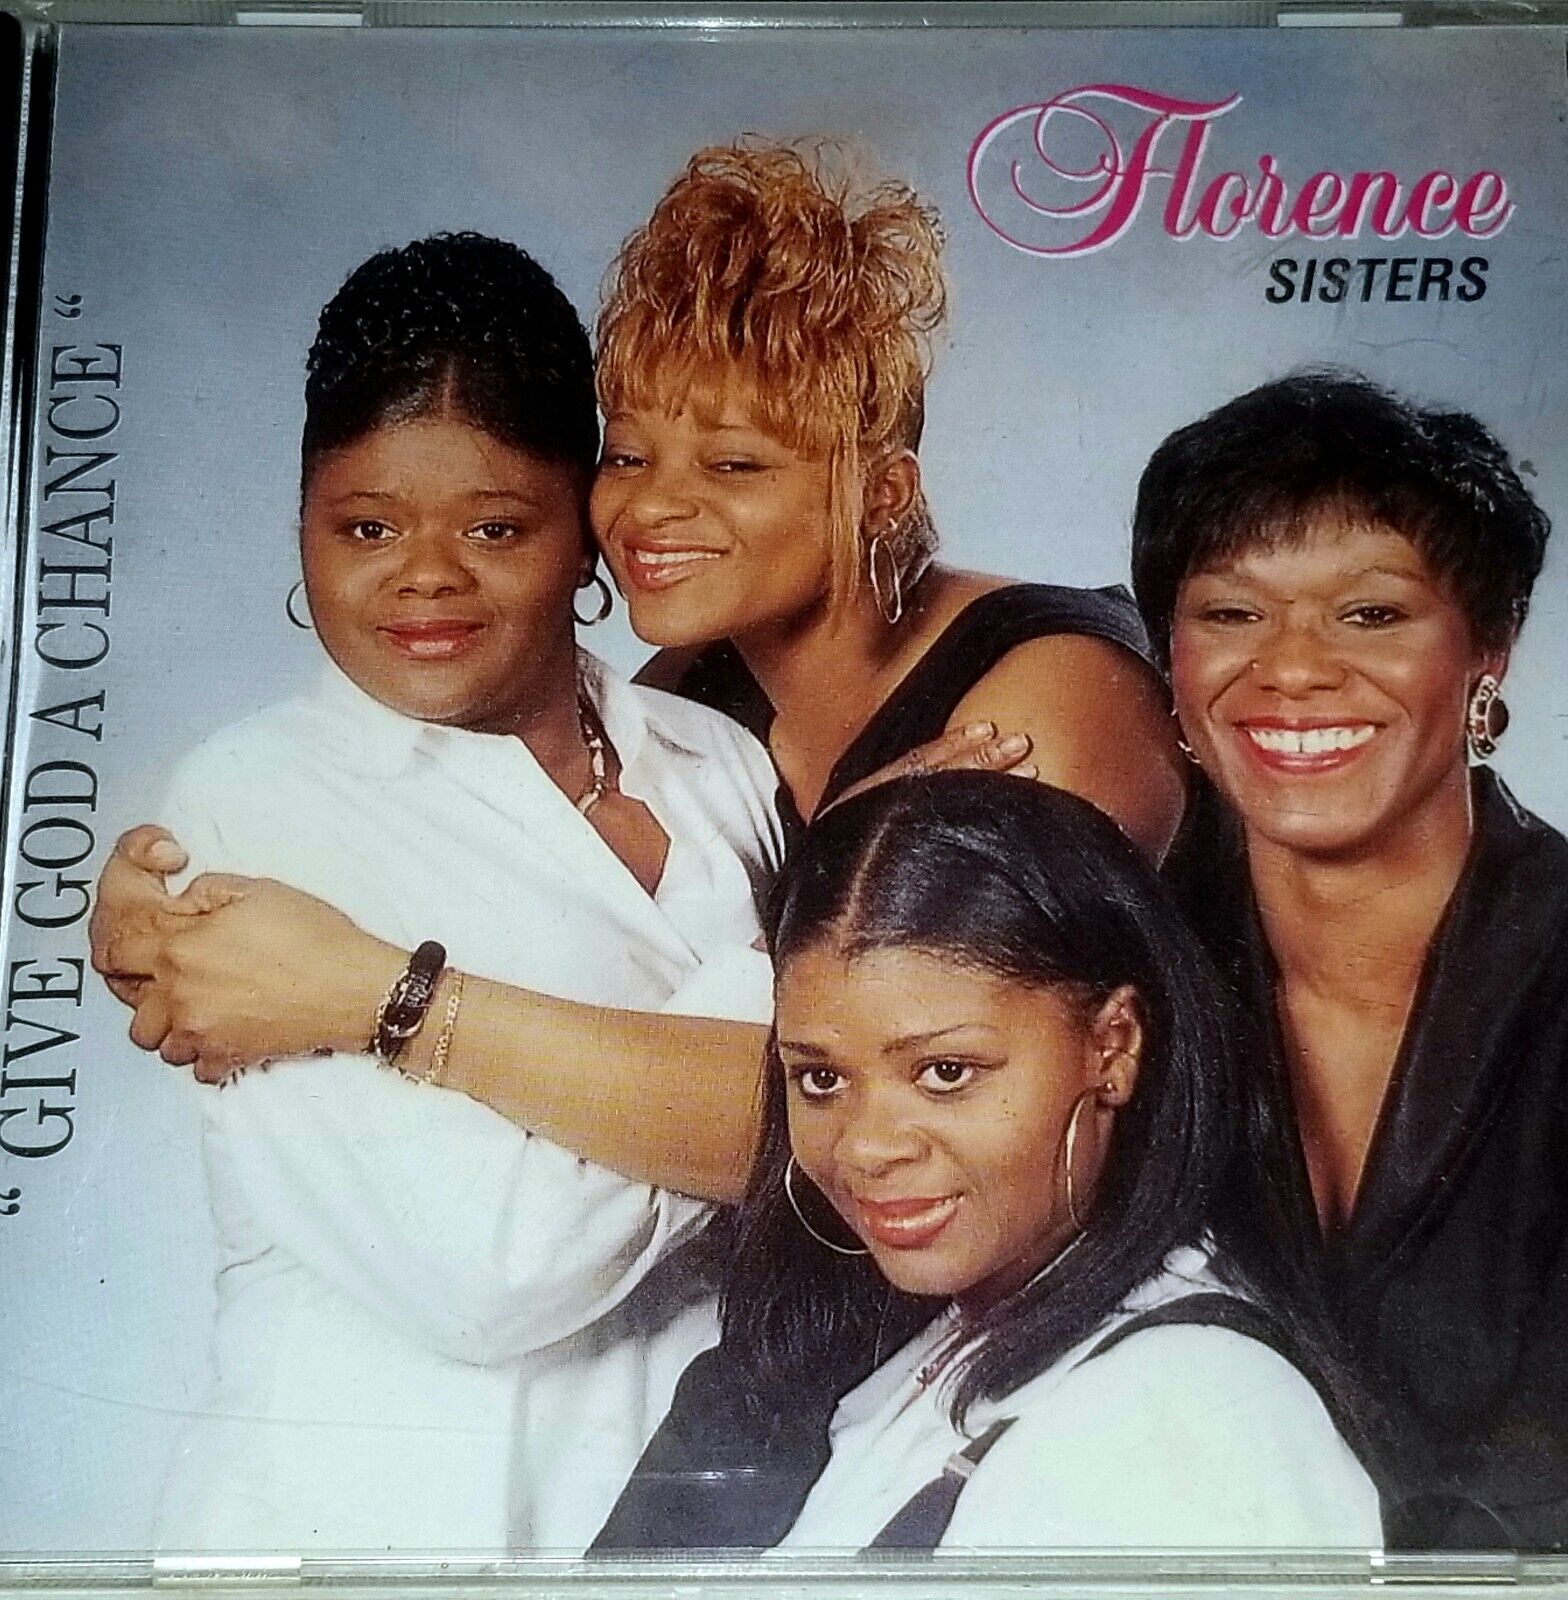 THE FLORENCE SISTERS SEALED CD PRIVATE SOUL FUNK GOSPEL 95' SHOUT RECORDS R&B lp